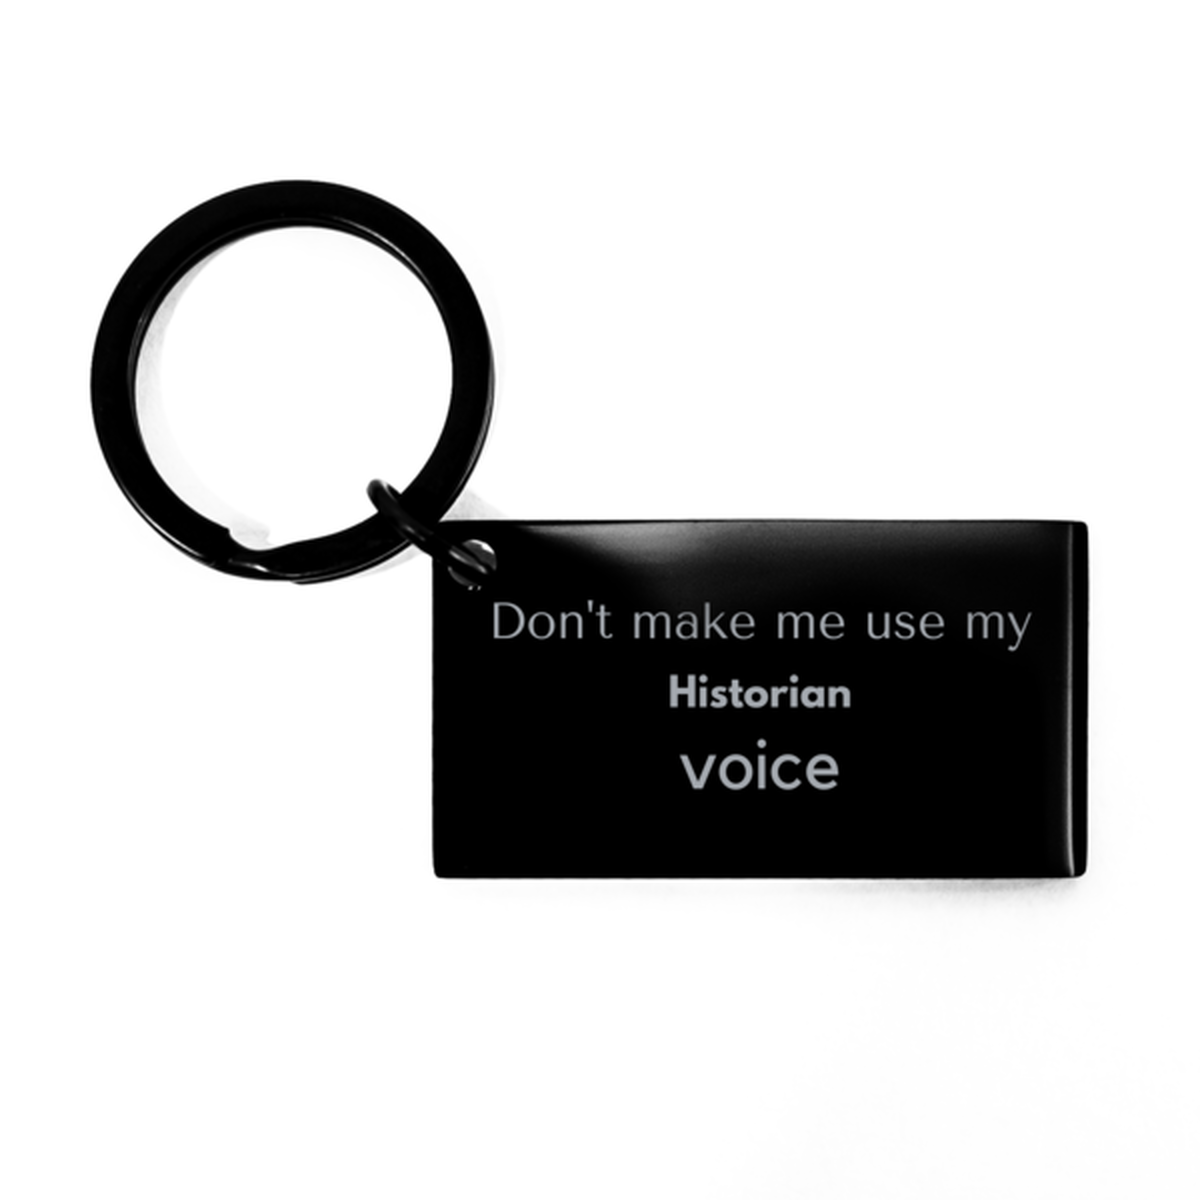 Don't make me use my Historian voice, Sarcasm Historian Gifts, Christmas Historian Keychain Birthday Unique Gifts For Historian Coworkers, Men, Women, Colleague, Friends